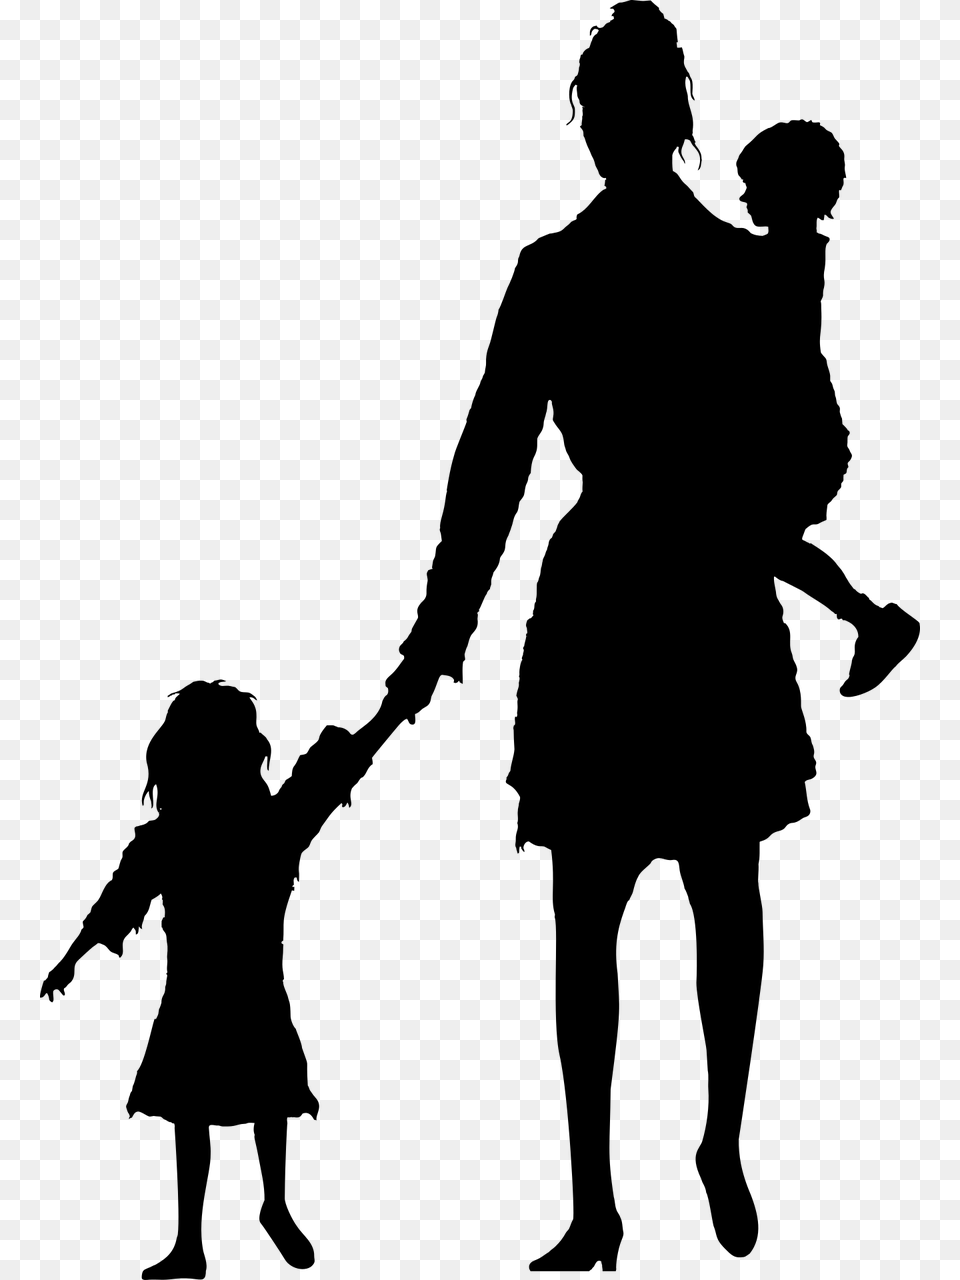 People Walking Away Silhouette Refugee Silhouette, Gray Png